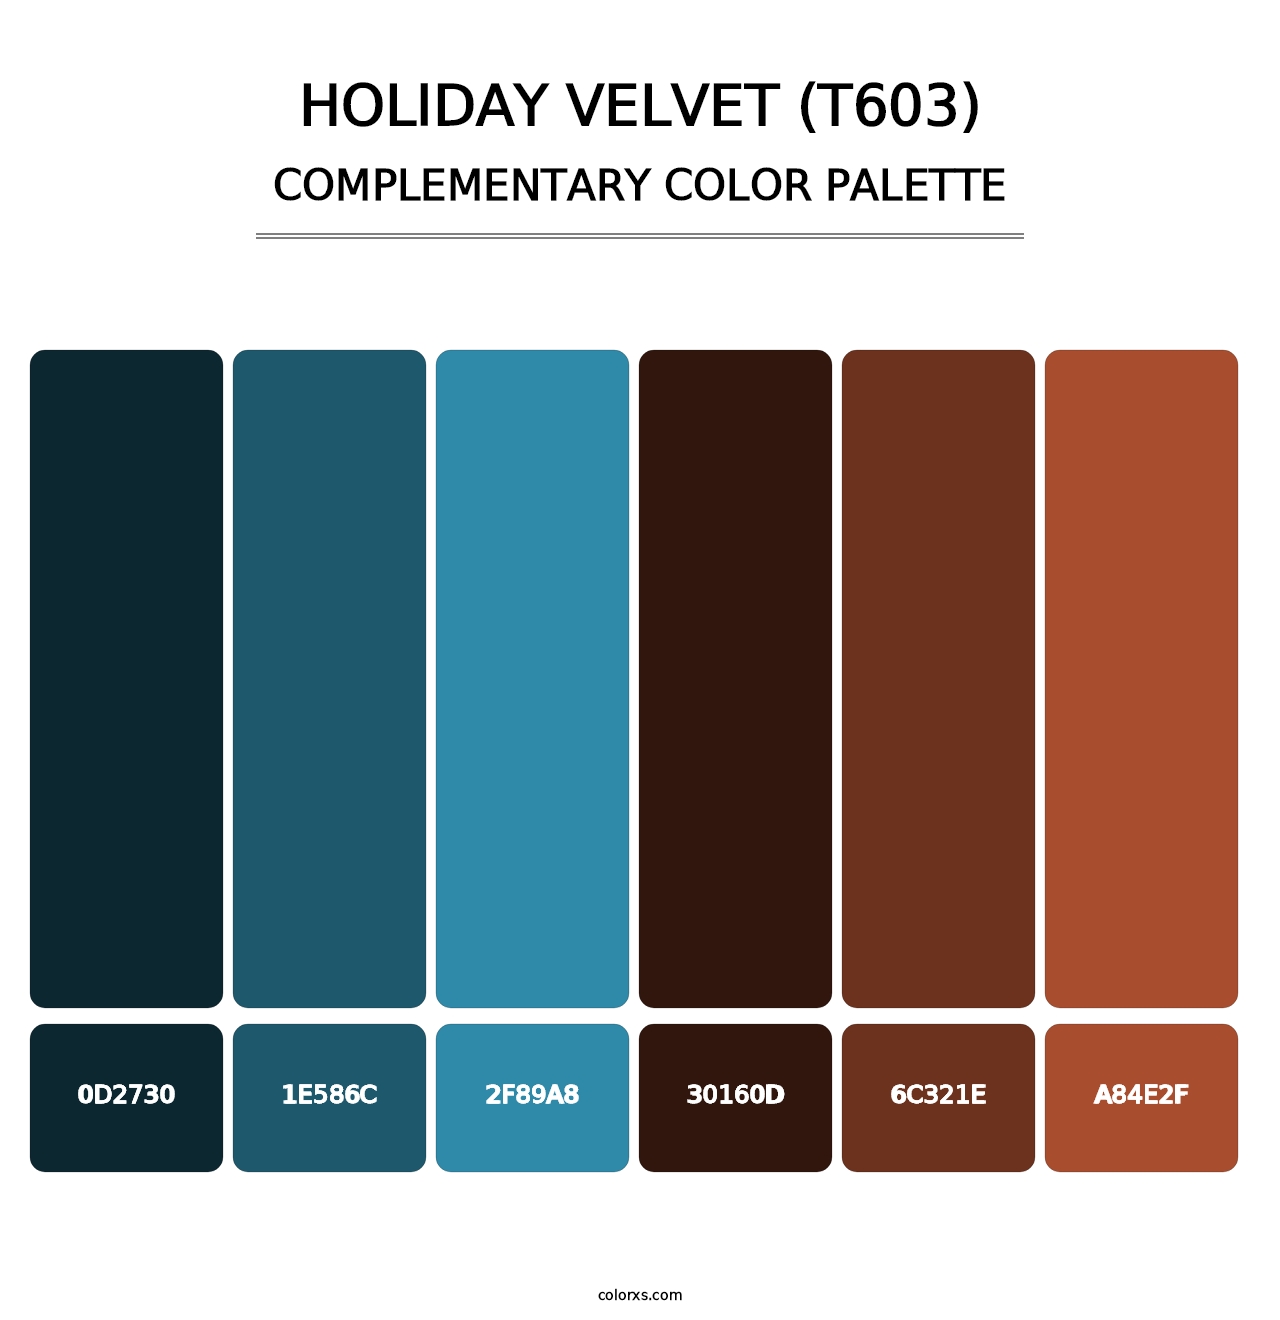 Holiday Velvet (T603) - Complementary Color Palette